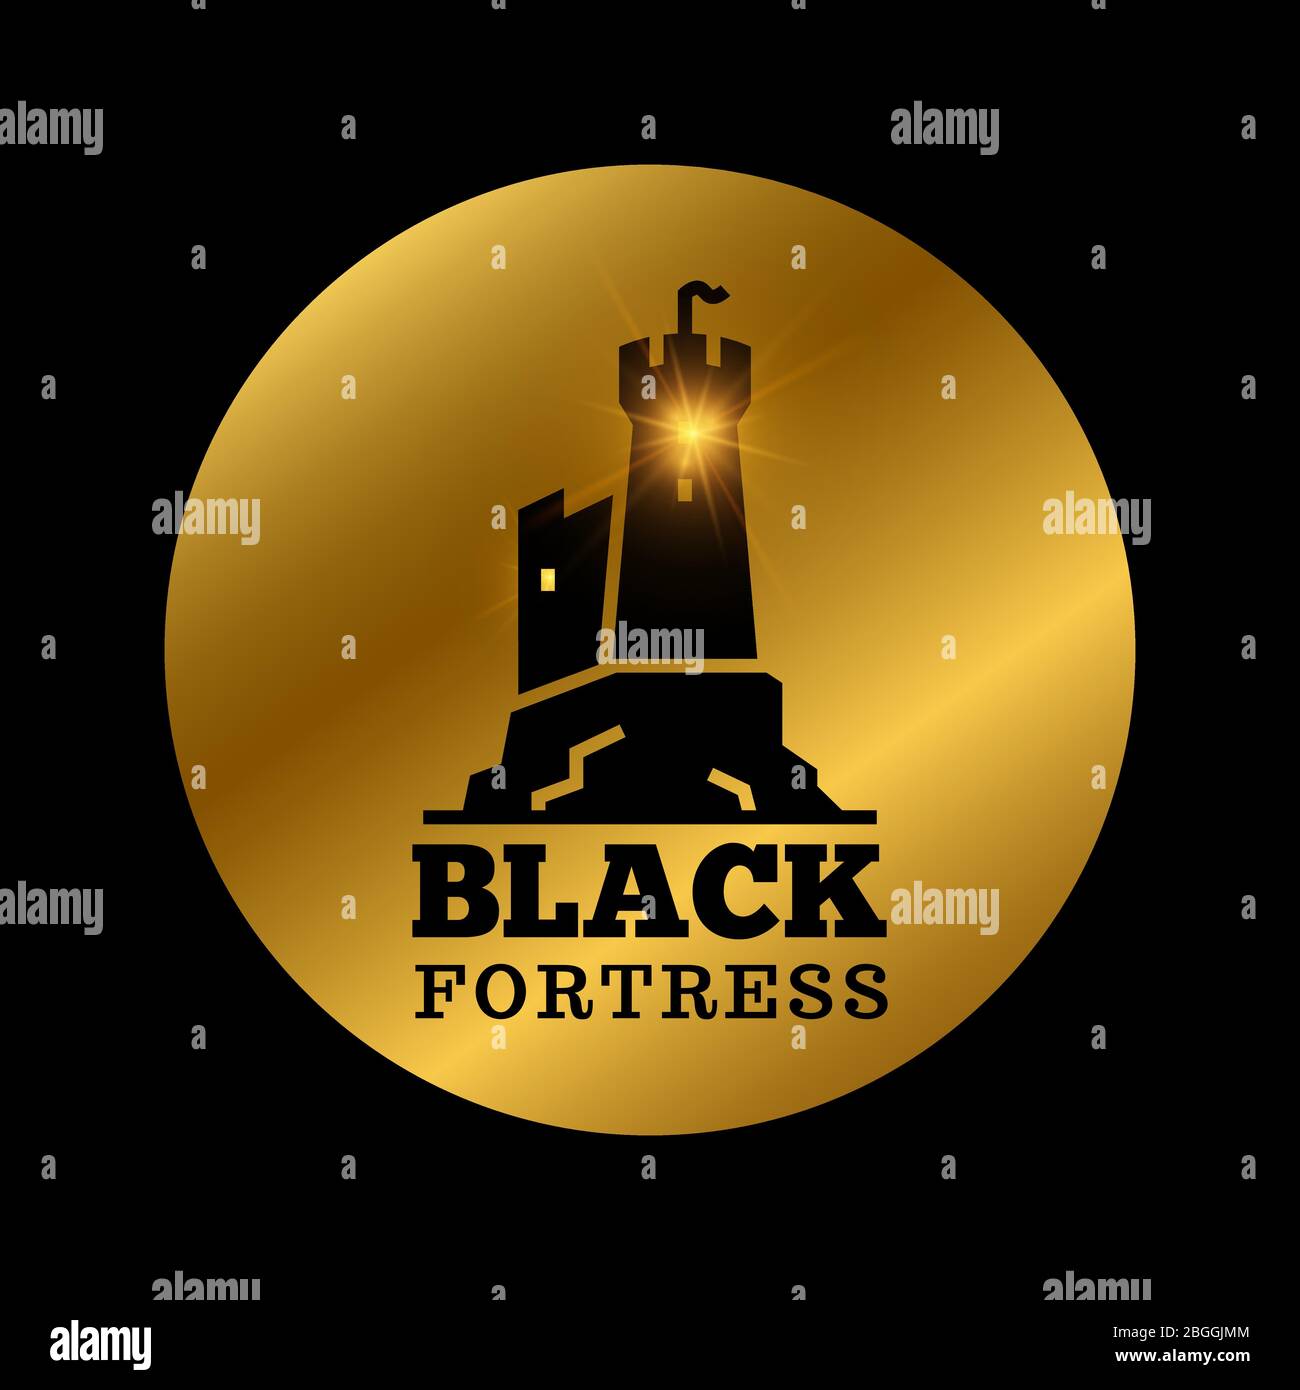 Black medieval castle silhouette. Fortress label icon design isolated. Vector illustration Stock Vector